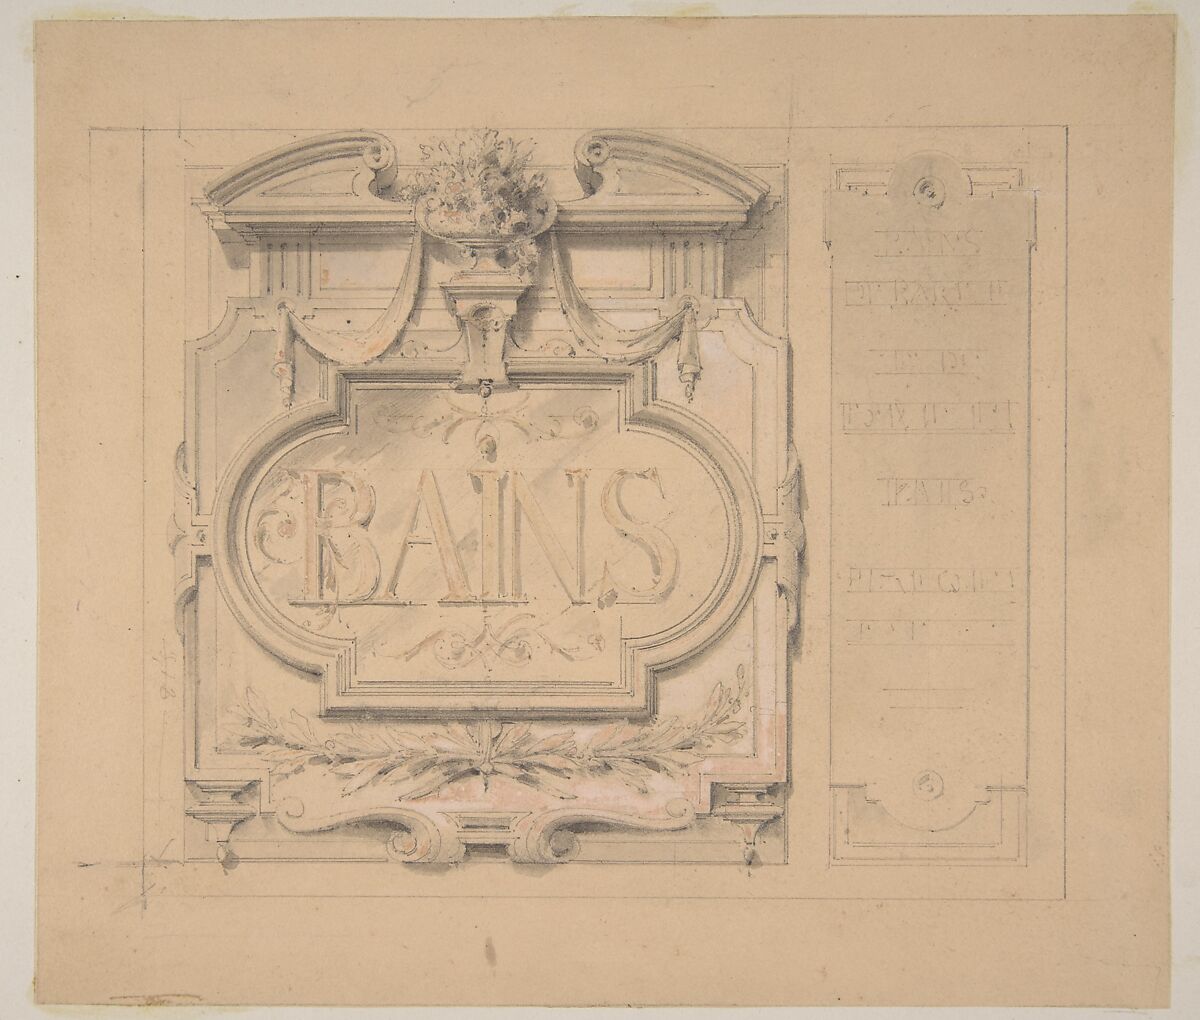 Design for an ornamental plaque for a bath house, Jules-Edmond-Charles Lachaise (French, died 1897), graphite, wash, and watercolor on wove paper; mounted on wove paper 